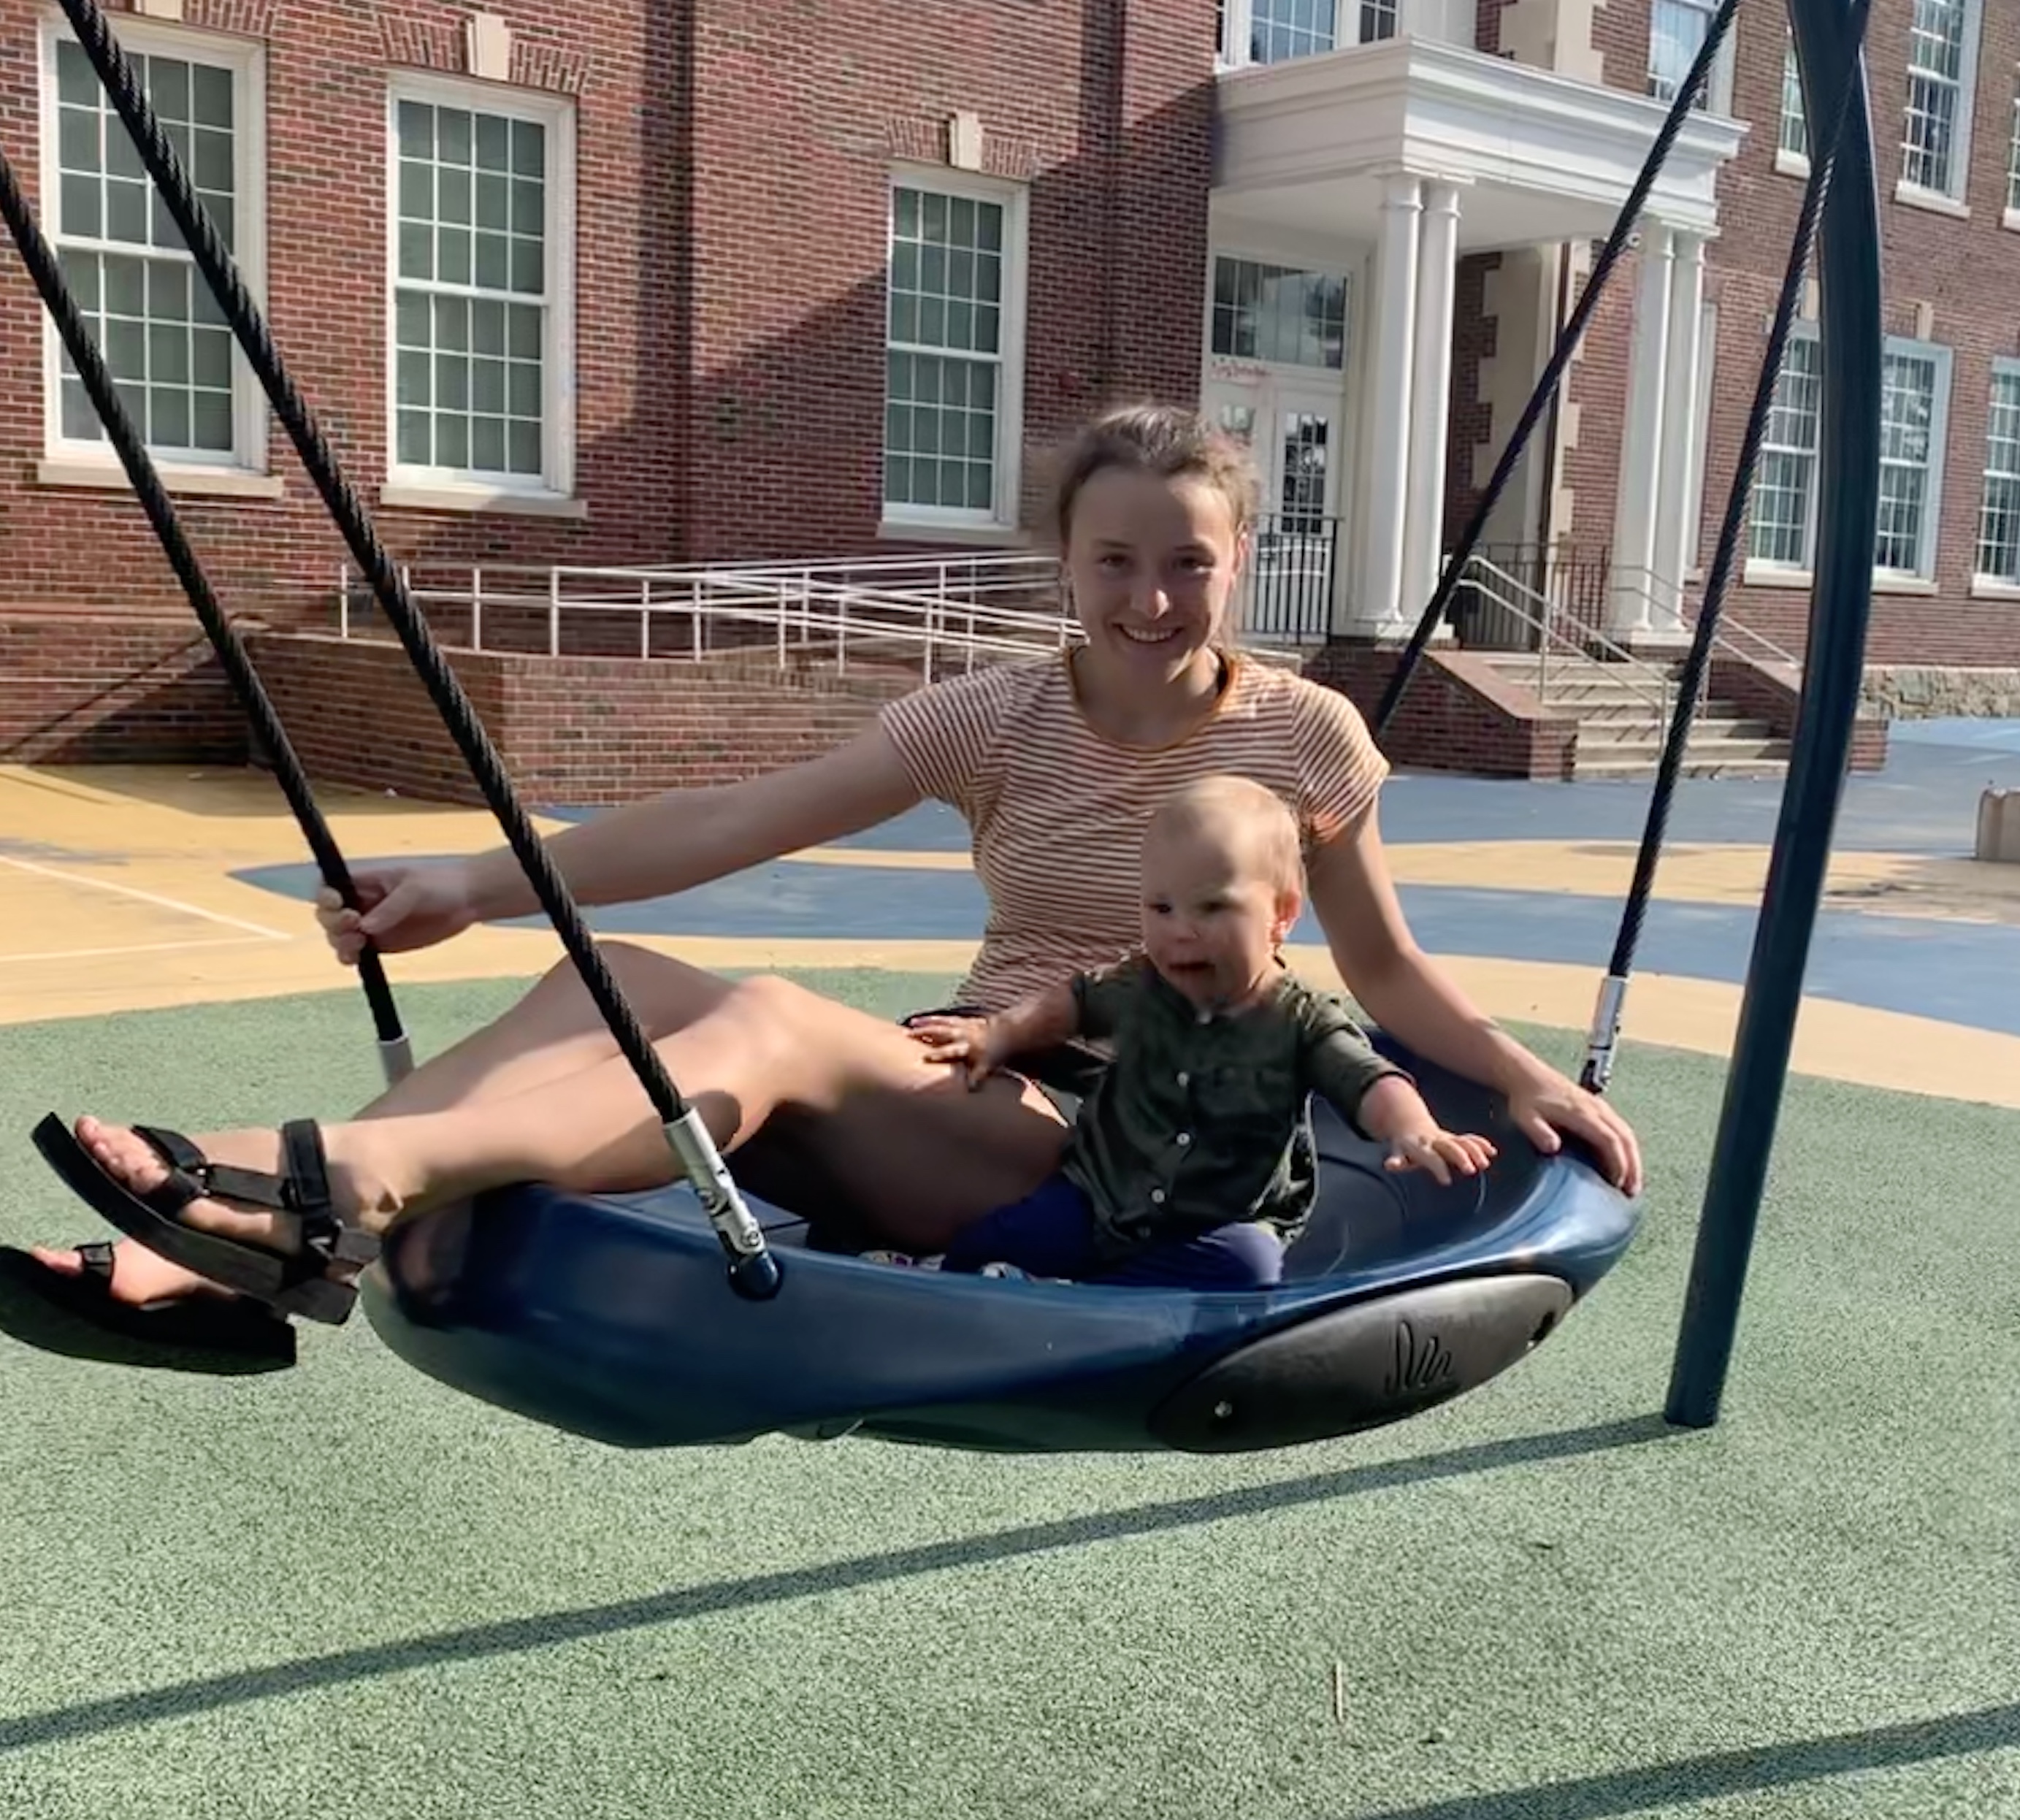 Michelle and Leah both on a circle swing at Lafayette Park in D.C. in August 2020